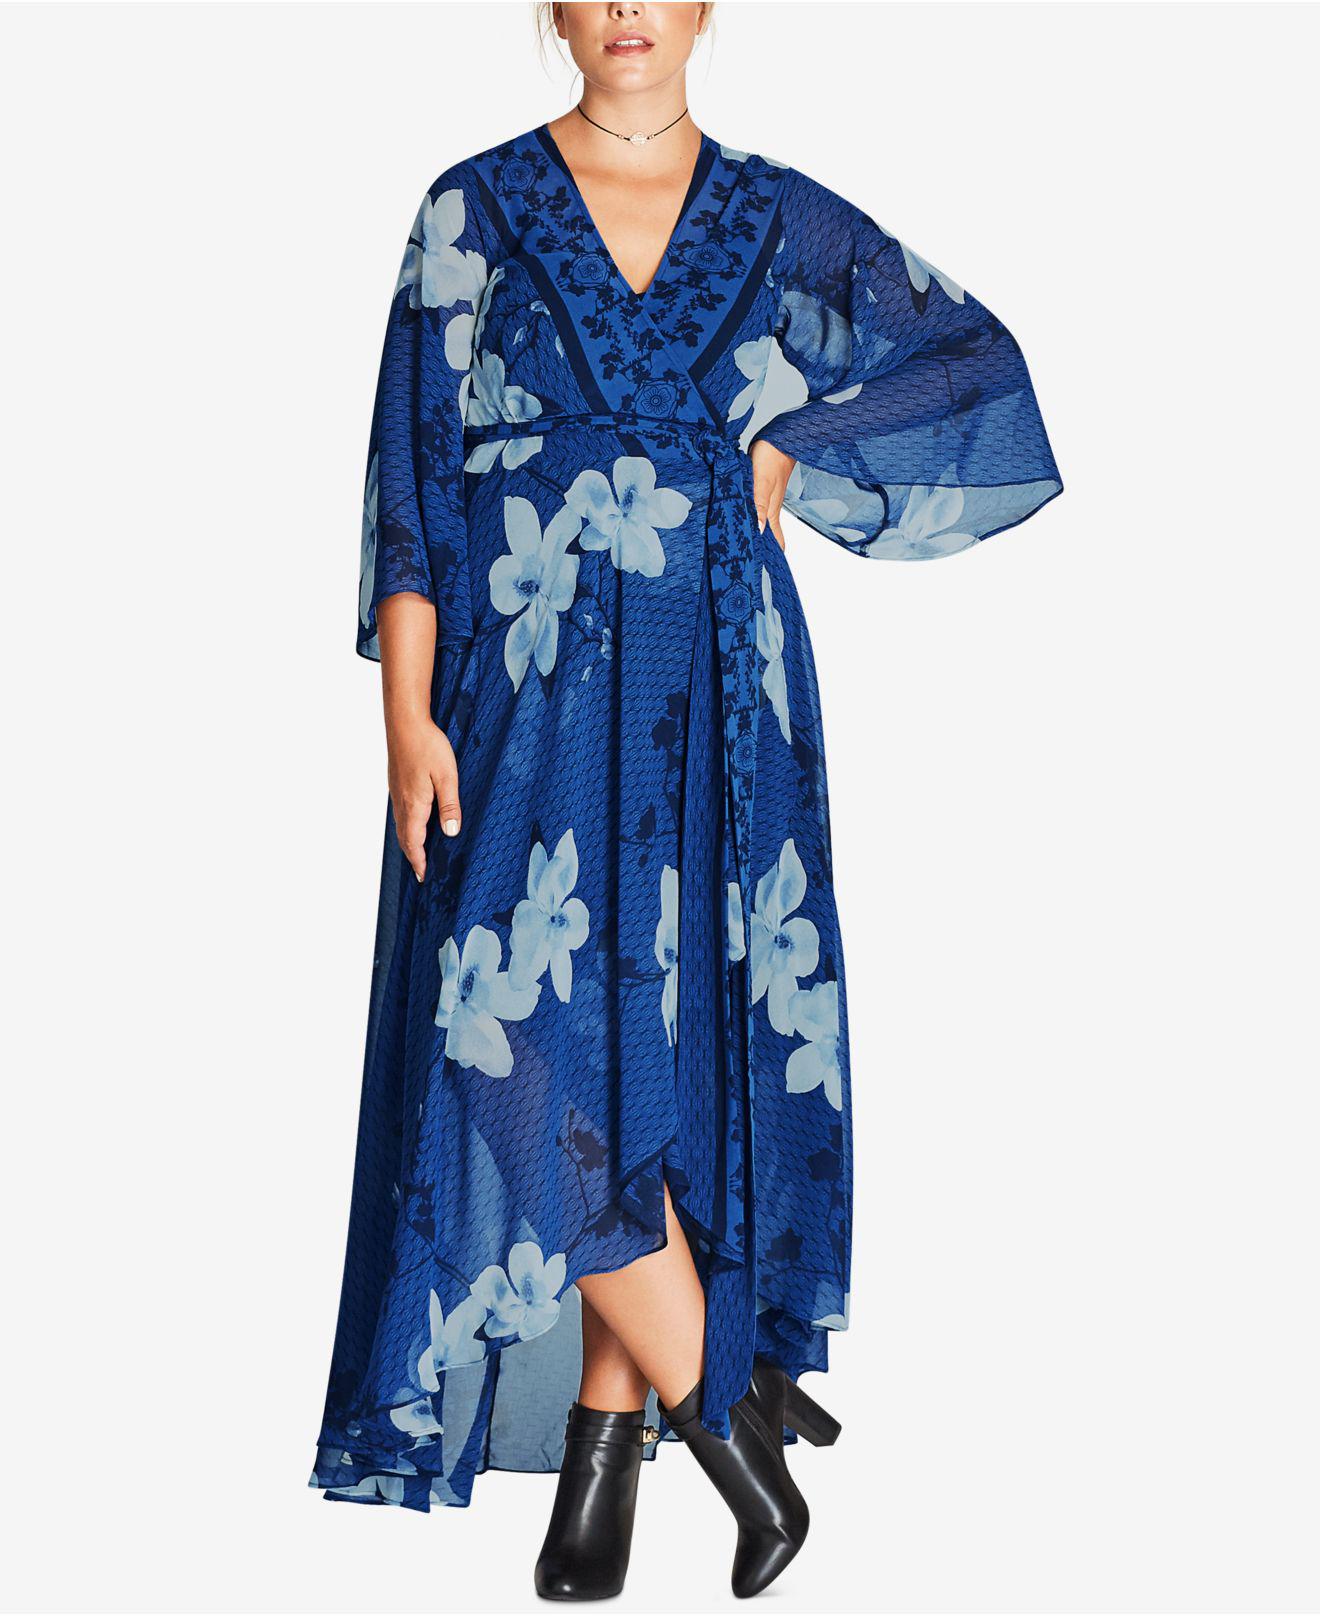 City Chic Synthetic Trendy Plus Size Kimono Maxi Dress in Blue - Lyst